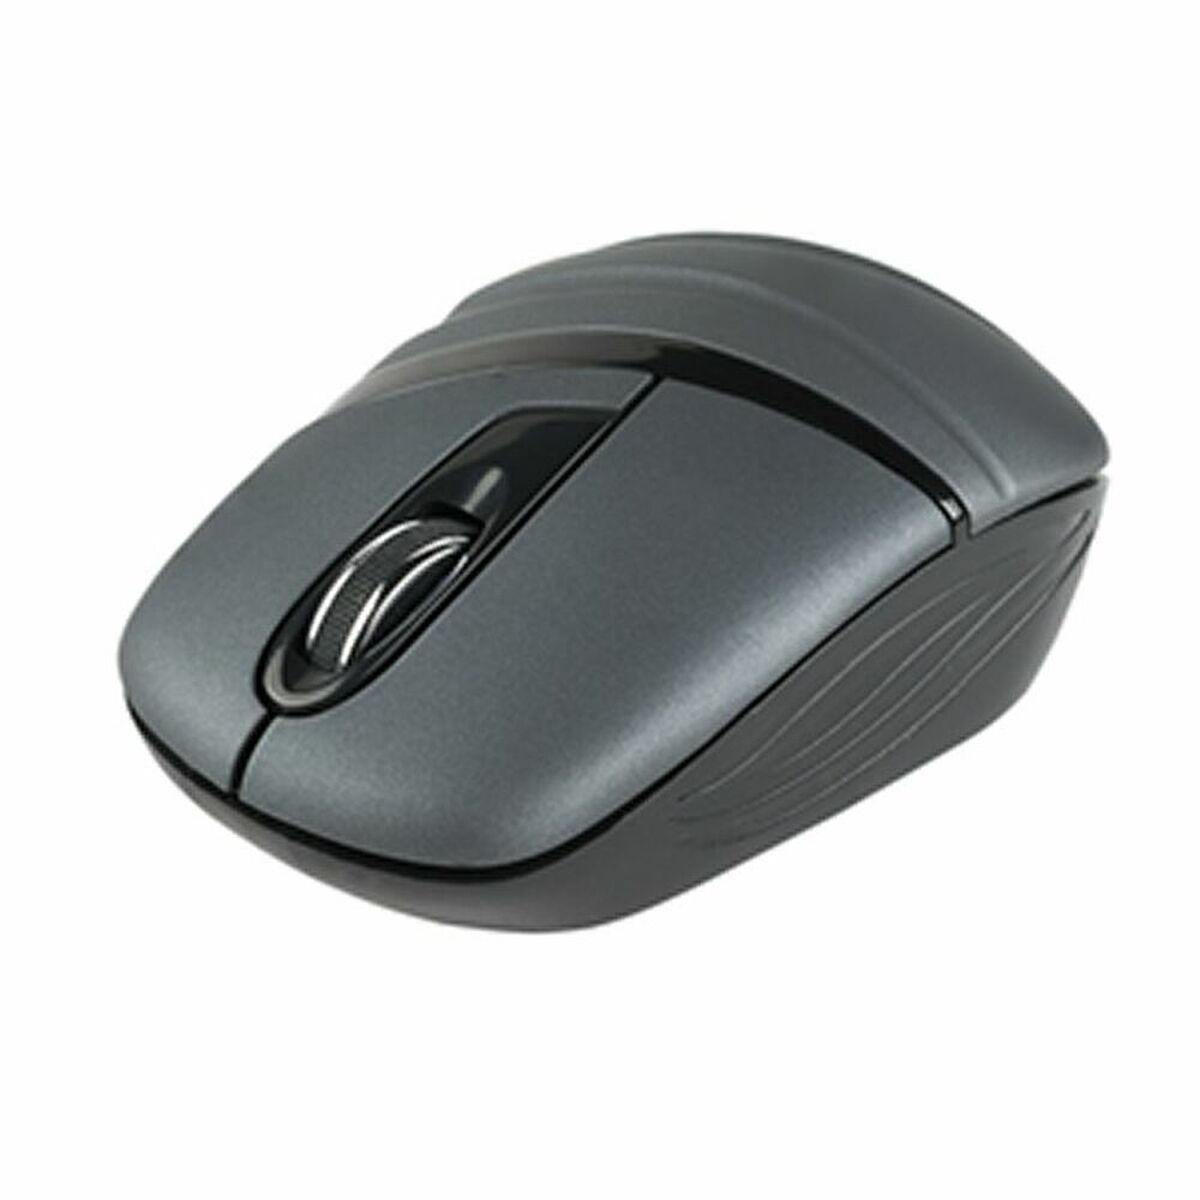 Mouse NGS ASH DUAL Black Black/Silver (1 Unit), NGS, Computing, Accessories, mouse-ngs-ash-dual-black-black-silver-1-unit, Brand_NGS, category-reference-2609, category-reference-2642, category-reference-2656, category-reference-t-19685, category-reference-t-19908, category-reference-t-21353, computers / peripherals, Condition_NEW, office, Price_20 - 50, RiotNook